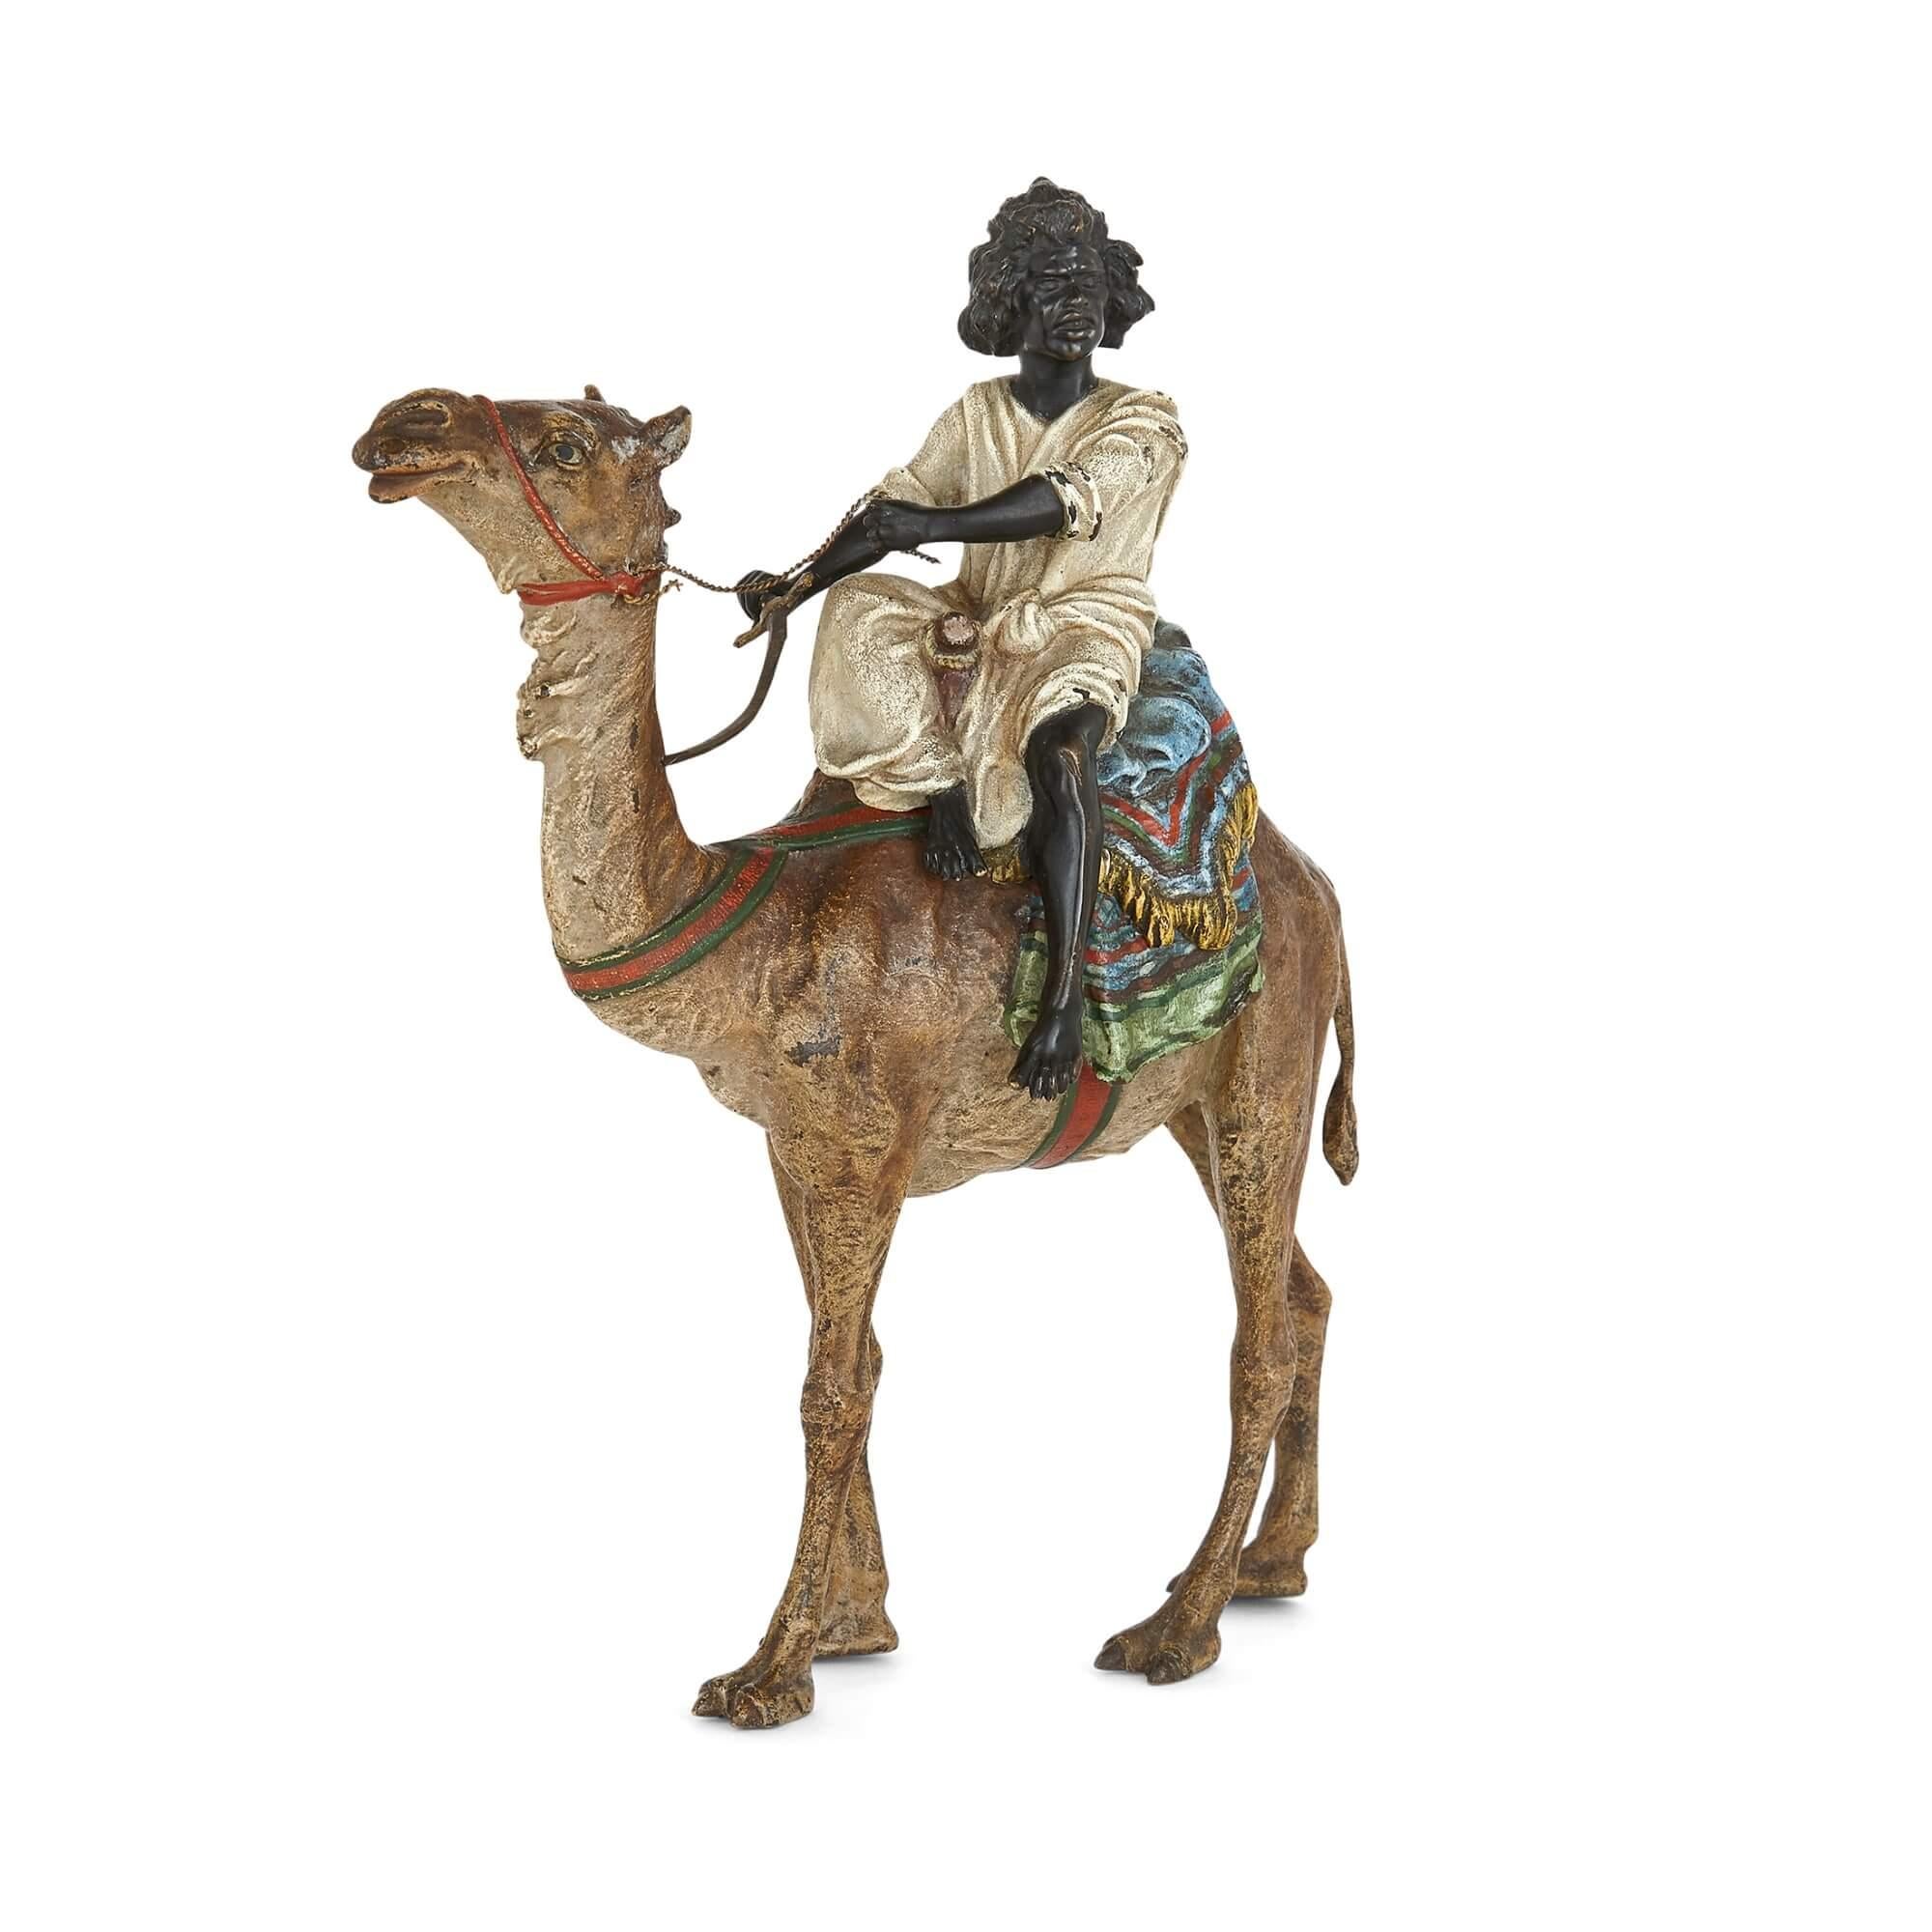 Cold-painted bronze of a camel by Franz Xaver Bergman
Austrian, c. 1910
Measures: Height 21cm, width 18cm, depth 7cm

This bronze sculpture of a camel and its rider epitomises the very best of Bergman. The camel is a superb piece of animalier